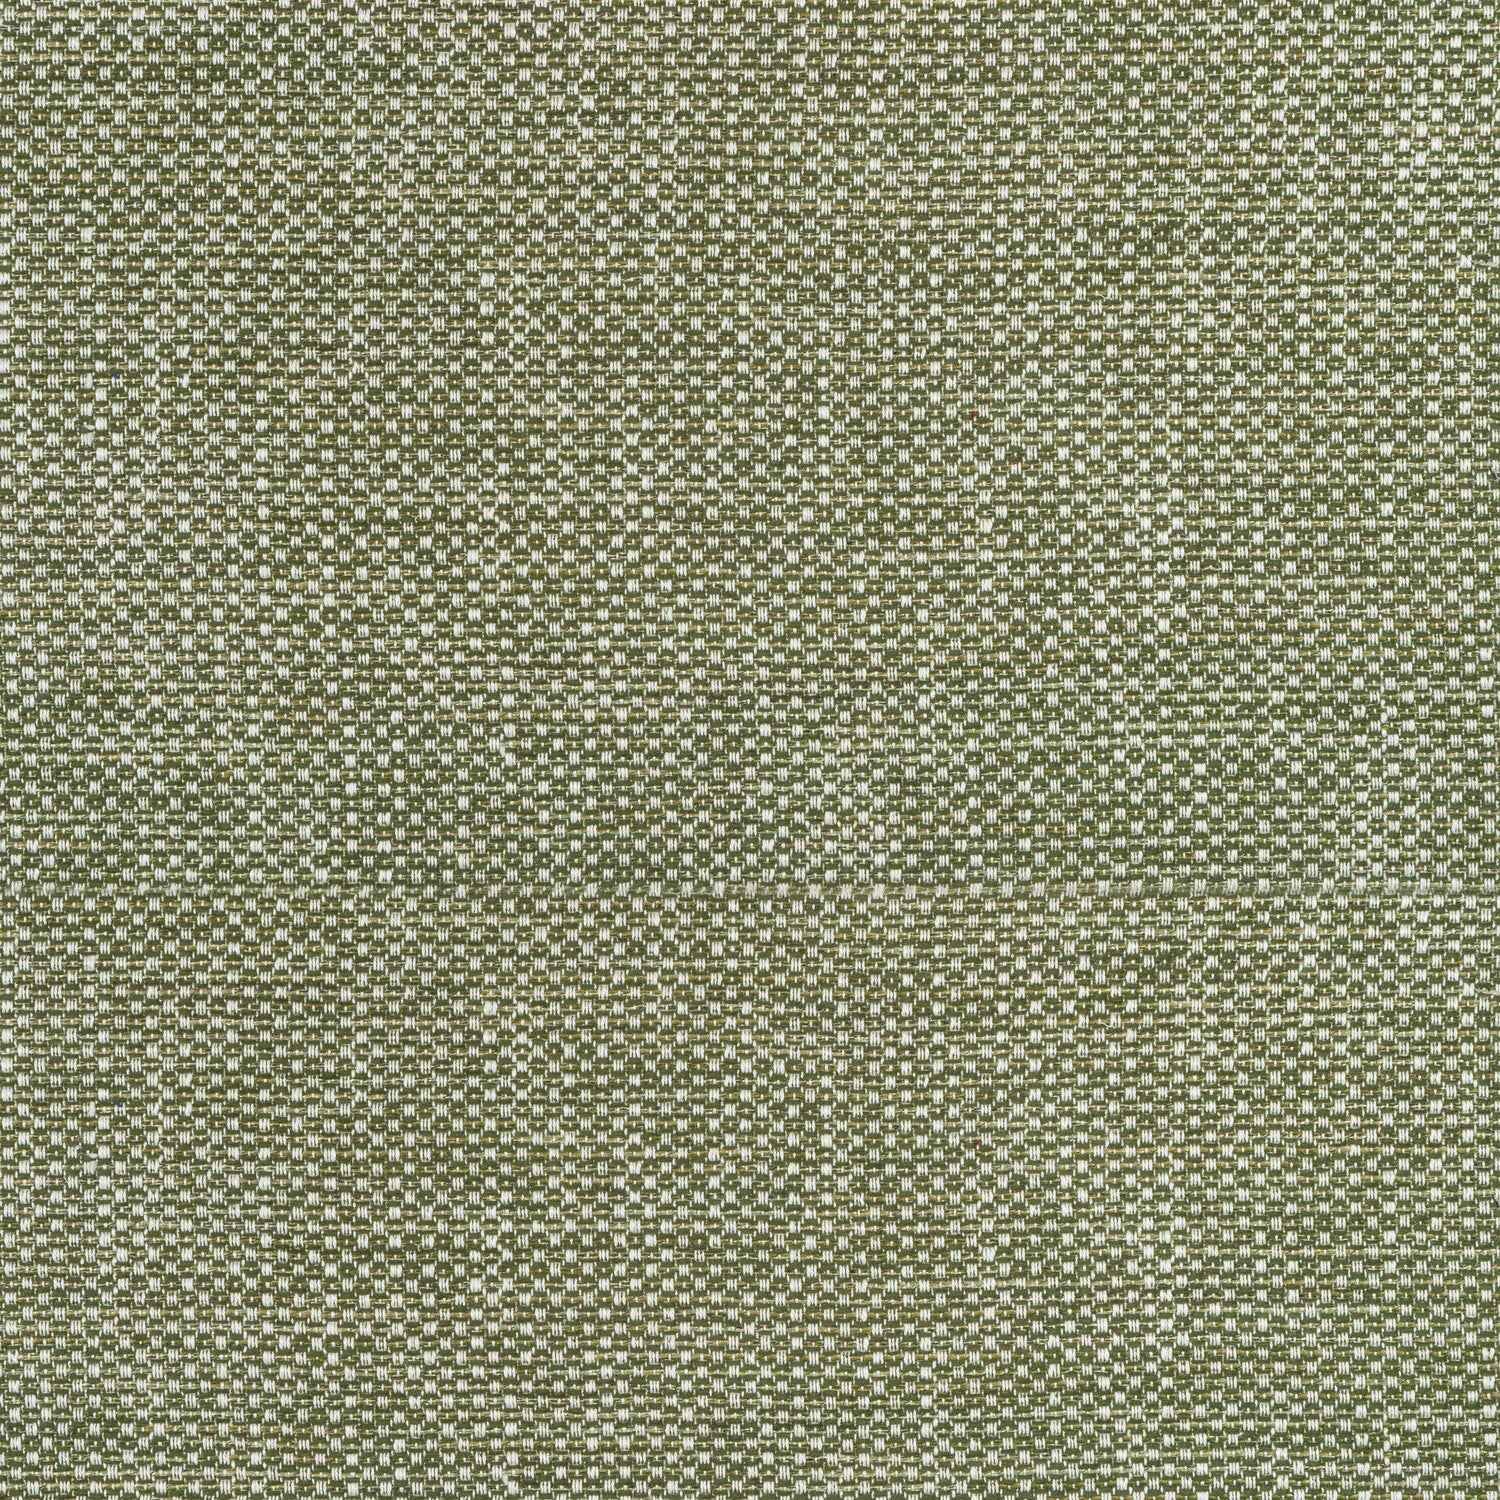 Cascade fabric in ivy color - pattern number W75263 - by Thibaut in the Elements collection